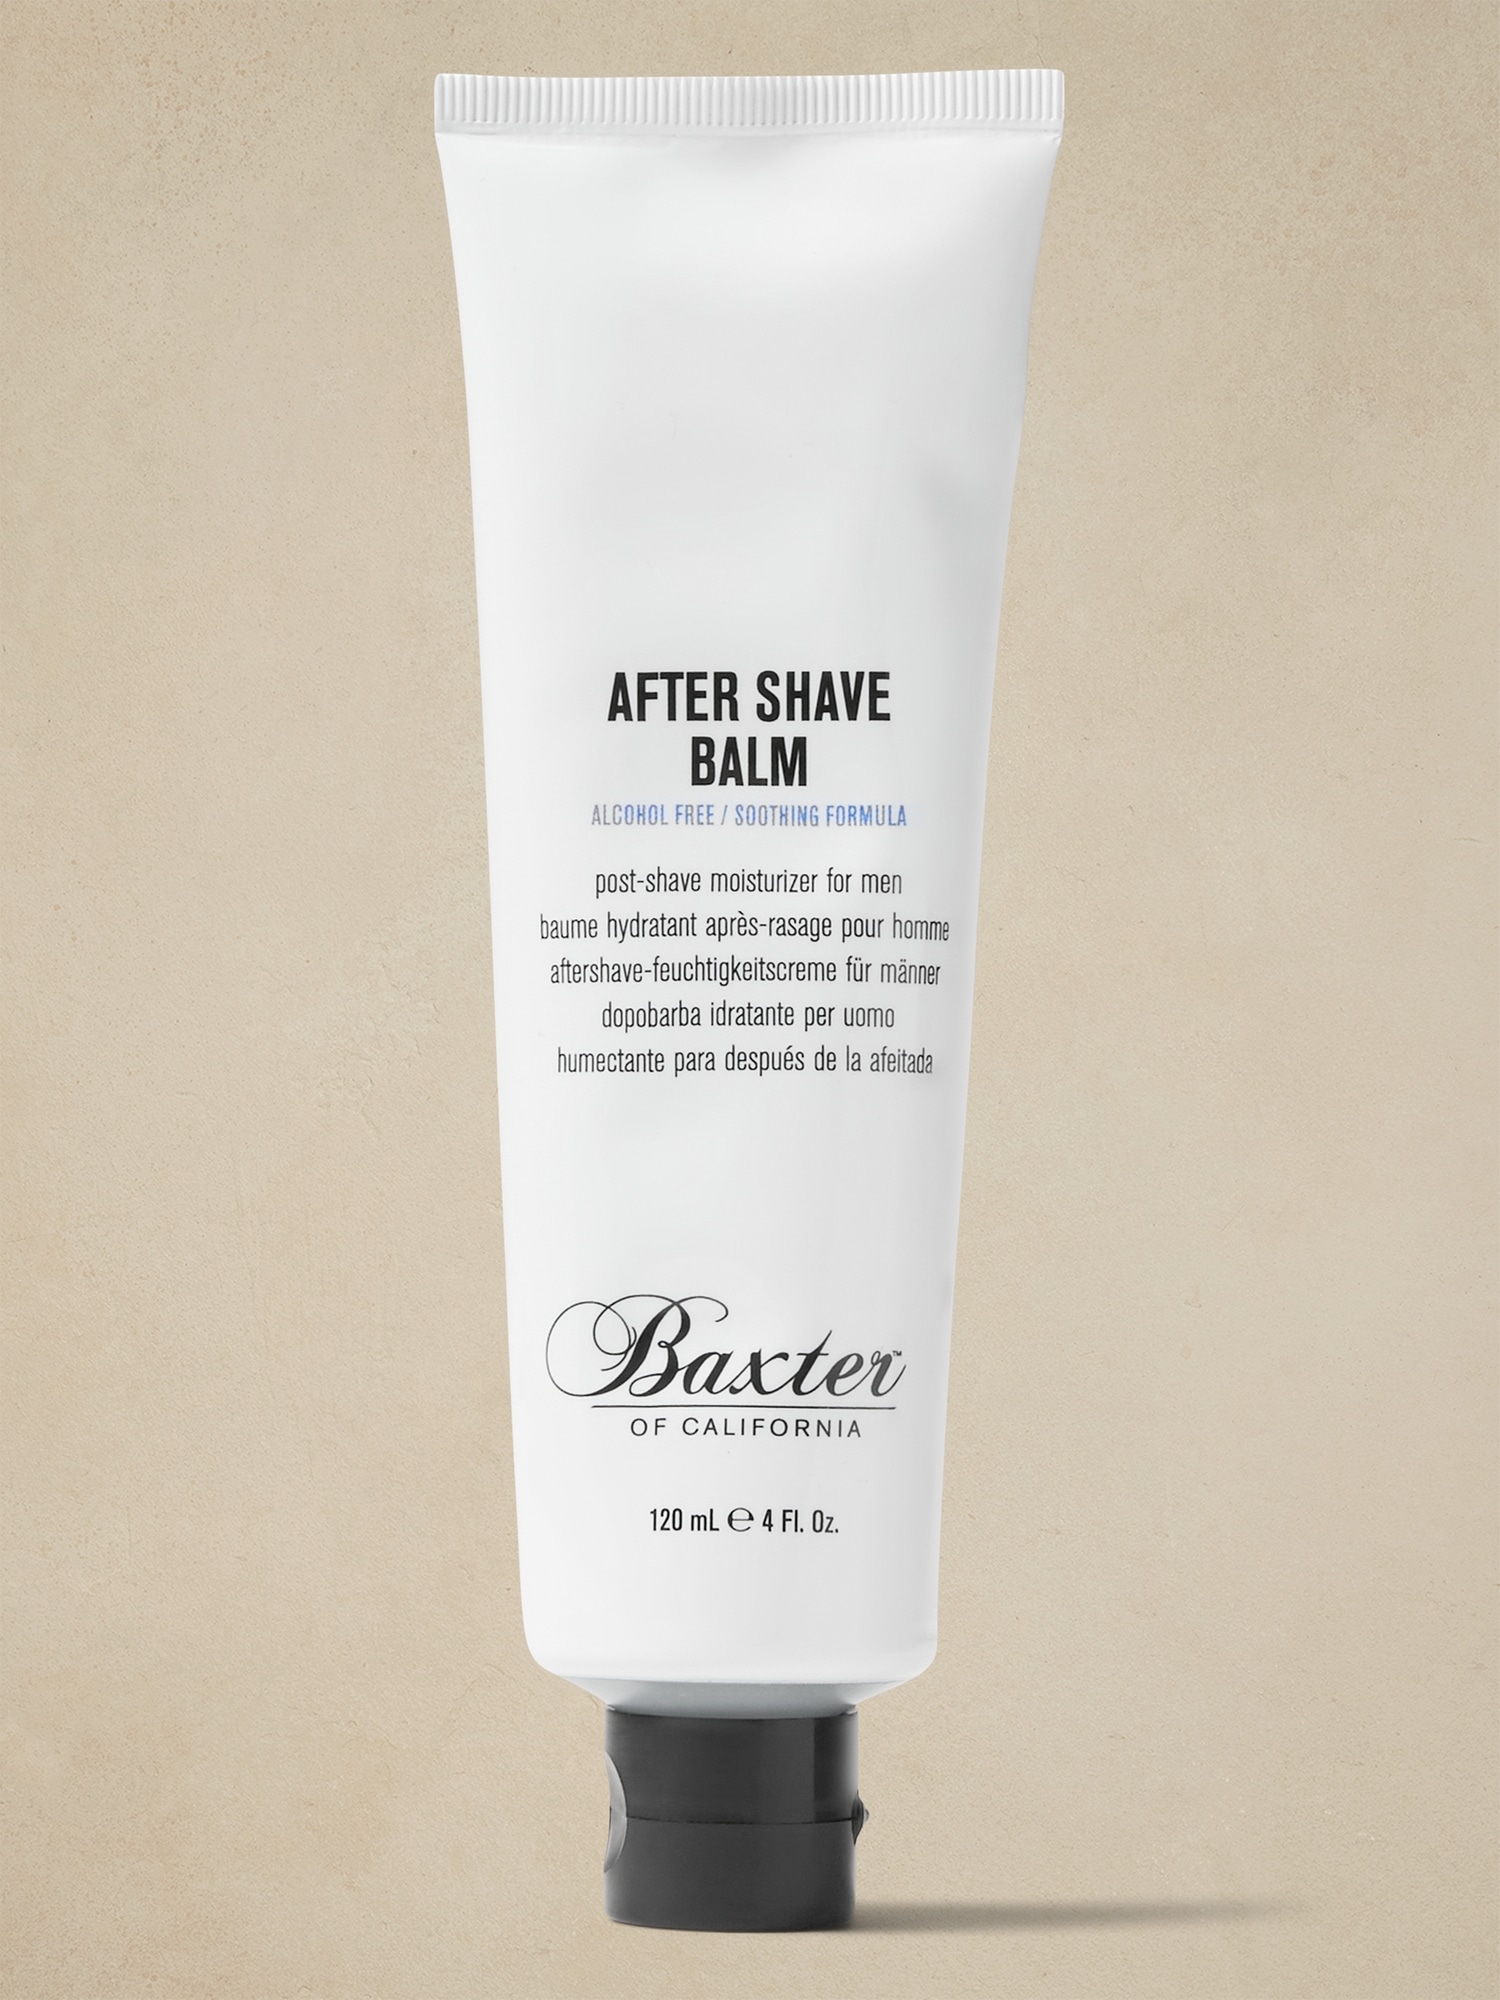 Baxter of California &#124 After Shave Balm